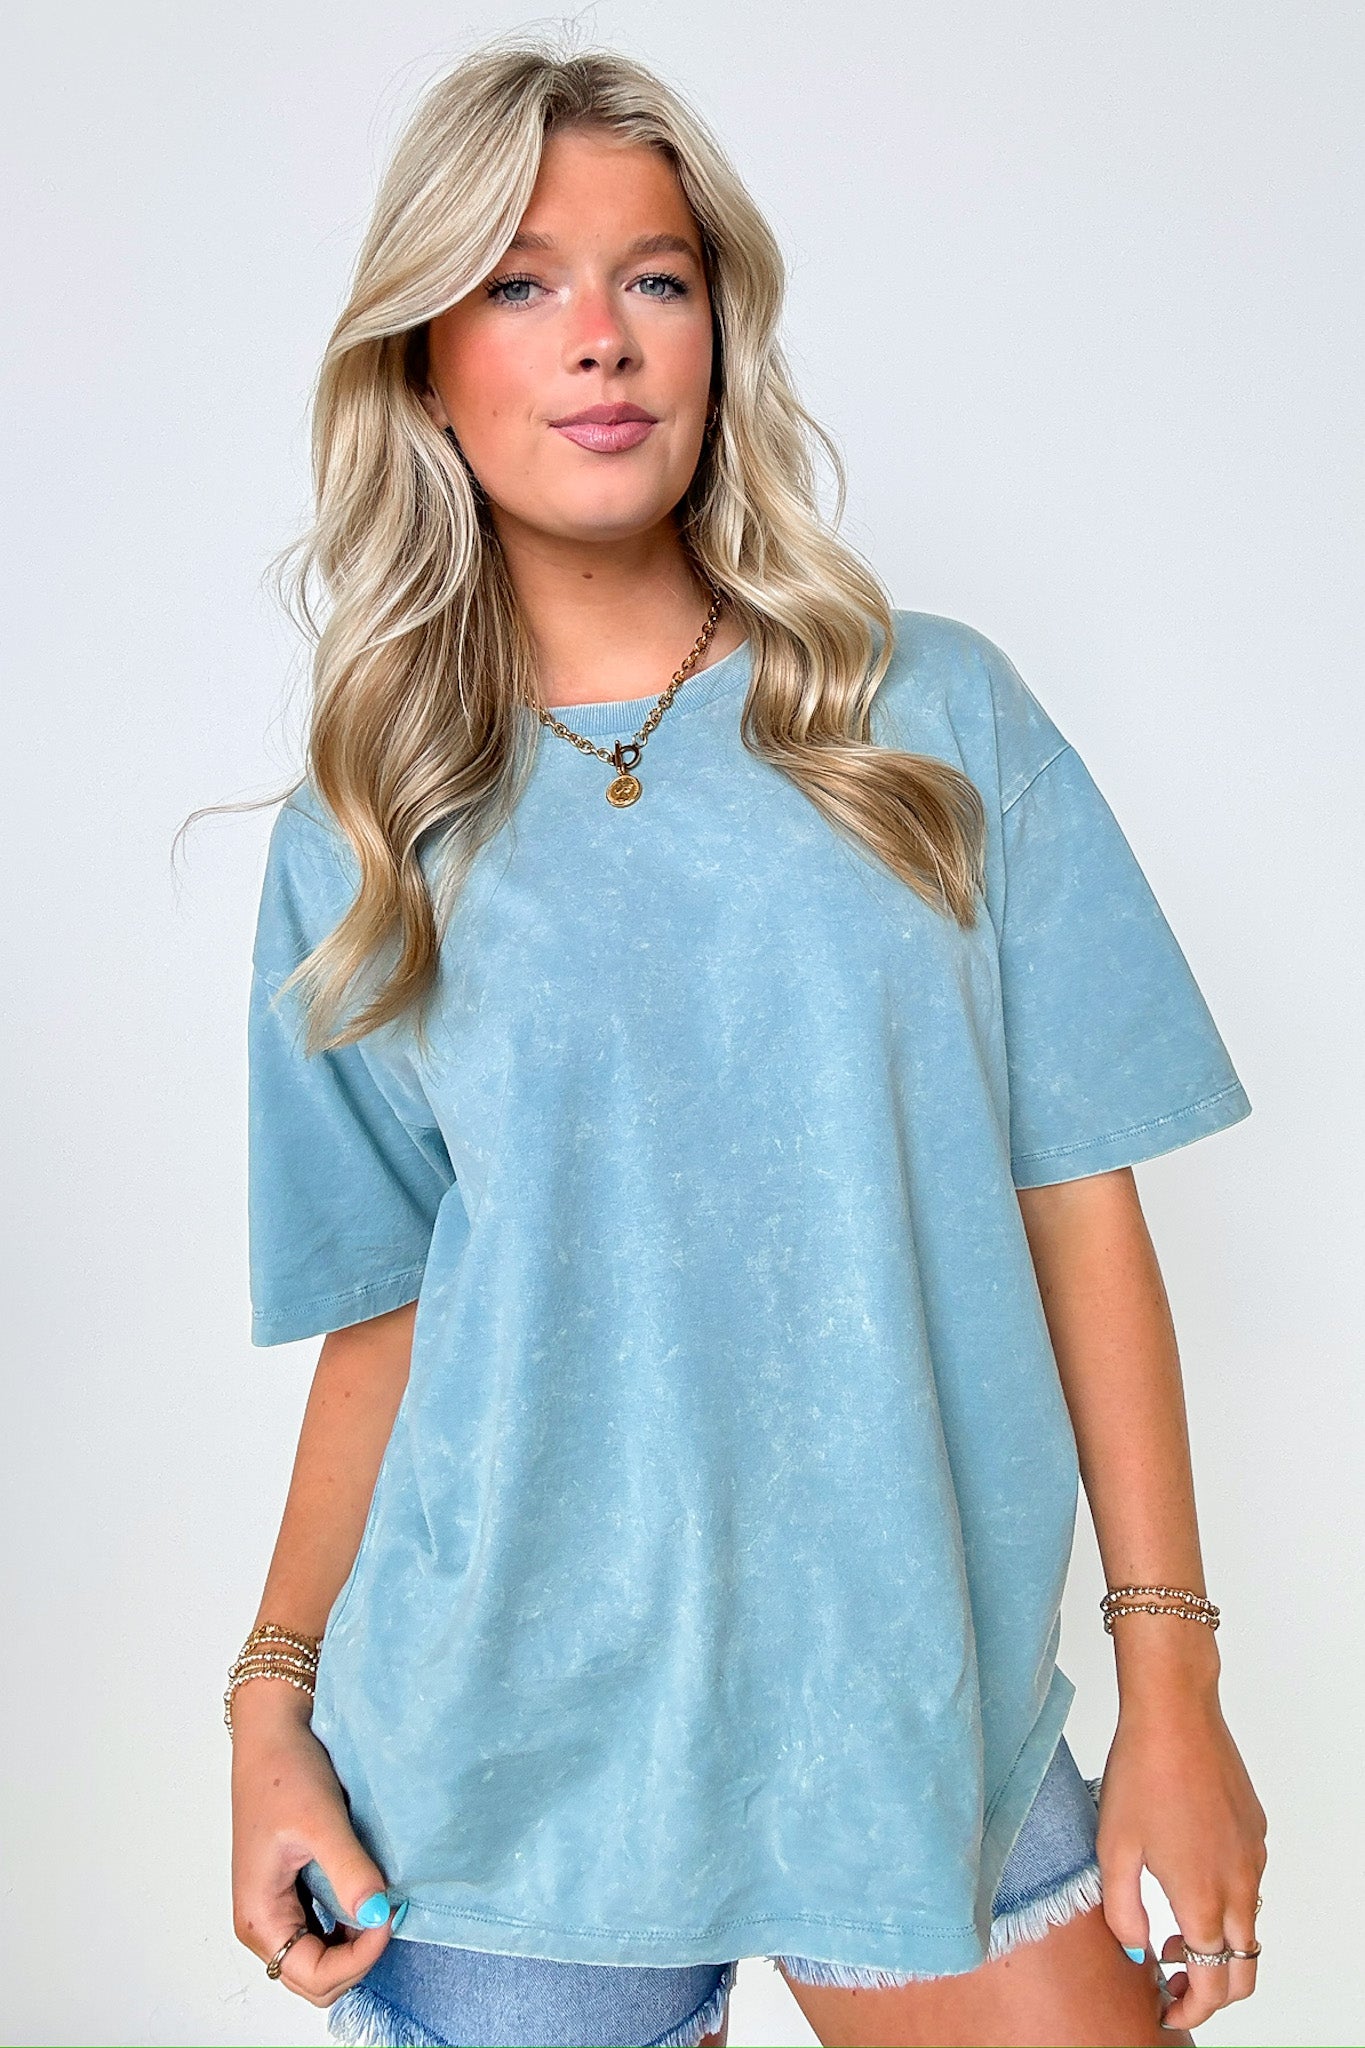 Blue Gray / SM Melena Mineral Washed Oversized Top - BACK IN STOCK - Madison and Mallory